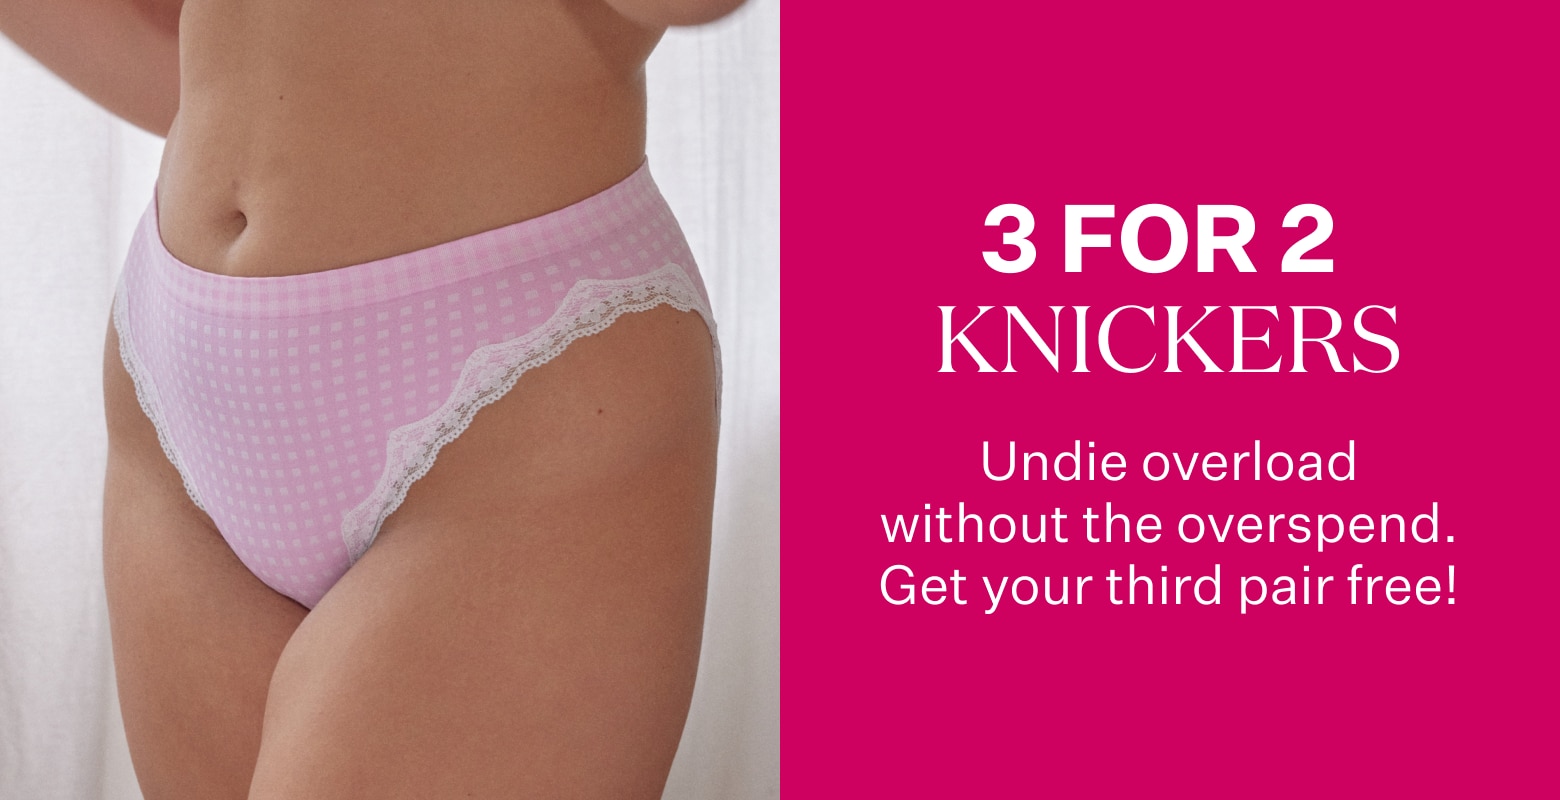 Two's company, three's a steal. Upgrade your undies without downgrading your wallet.